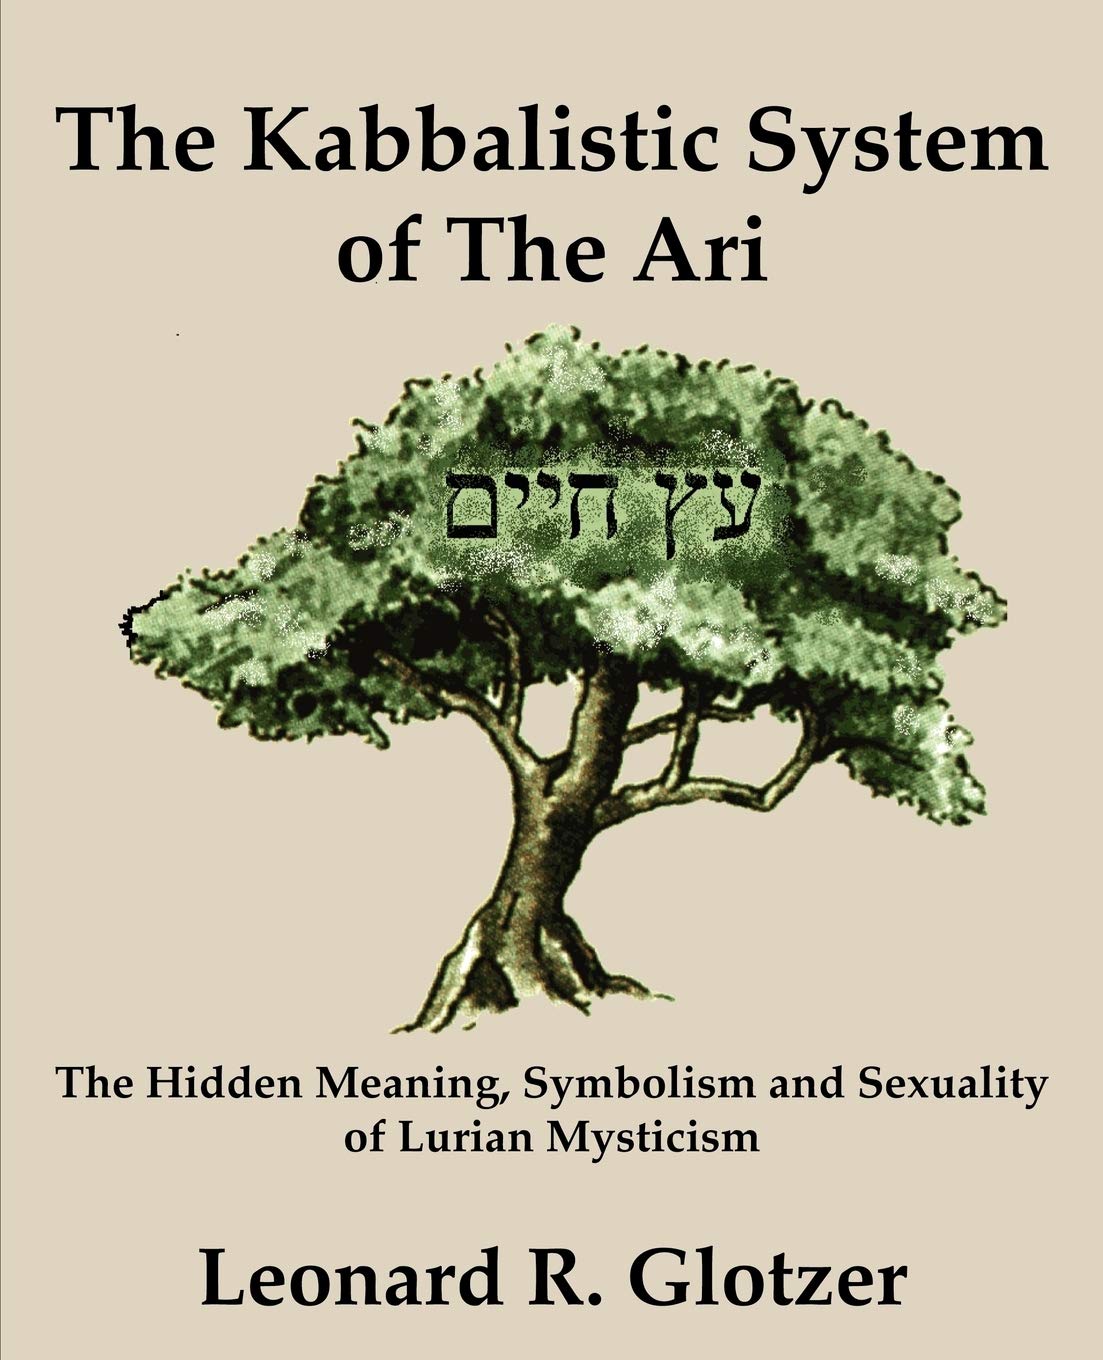 The kabbalistic system of the ari: